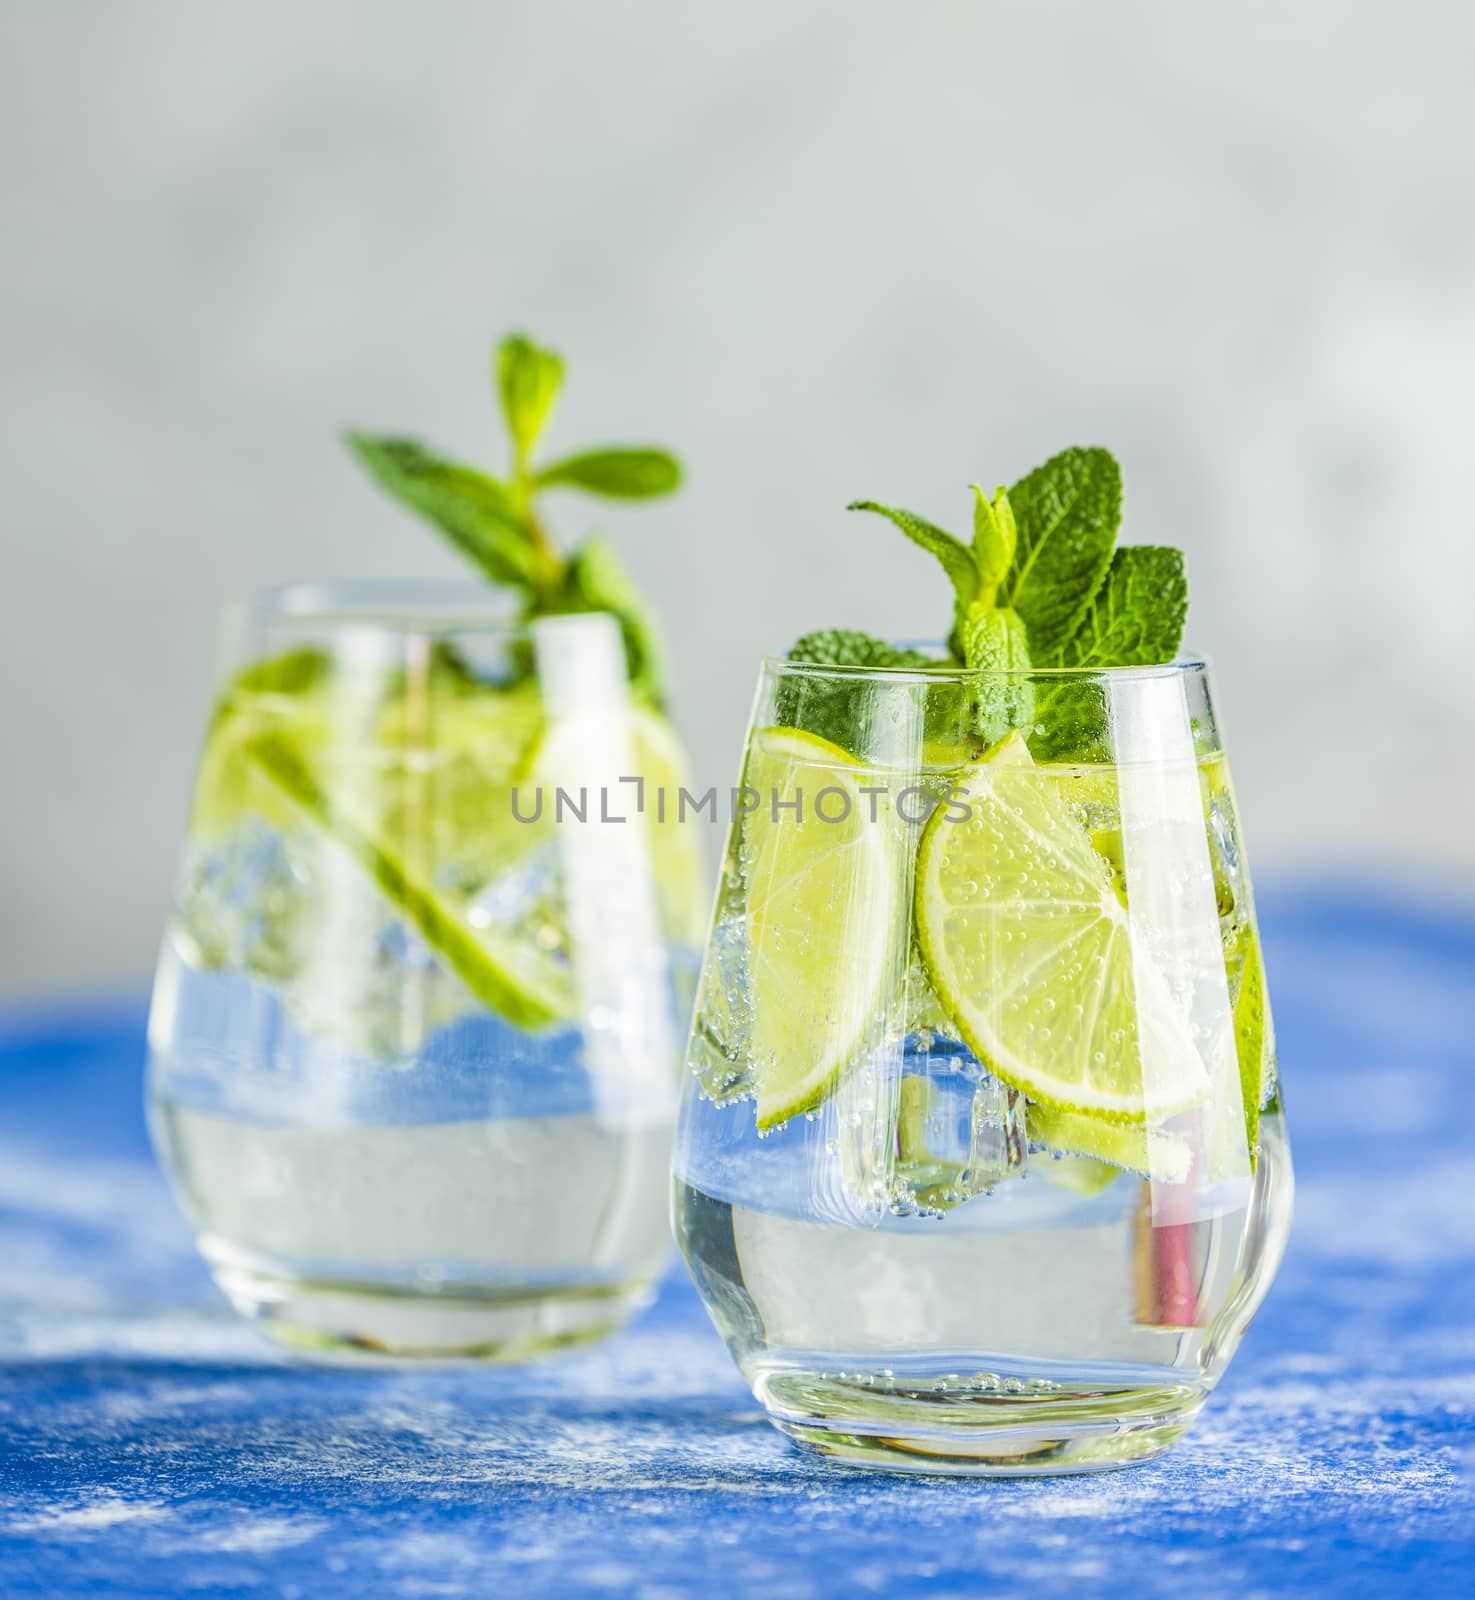 Two detox water or mojito. Summer bright drinks with mint. Refreshing drinks and juices from juicy fruits and mint. A new kind of mojito with kiwi, lime and mint and of course ice.